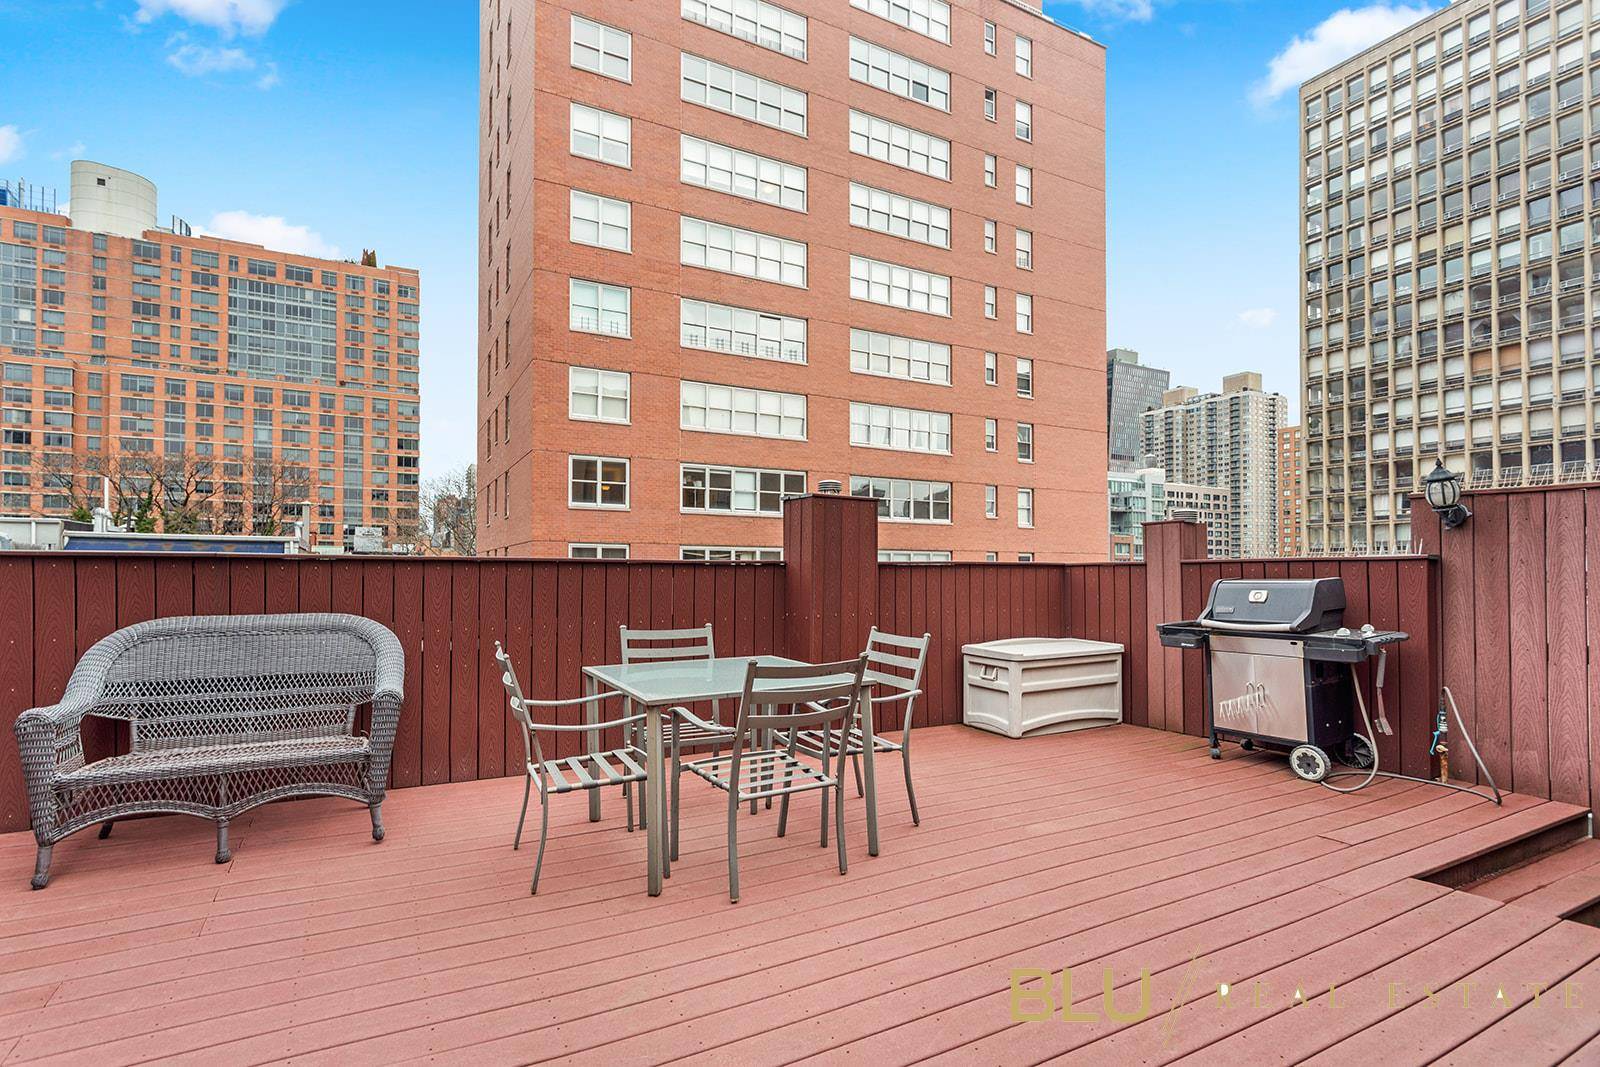 Back on the Market ! Come home to this one of a kind duplex residence with a private roof deck.